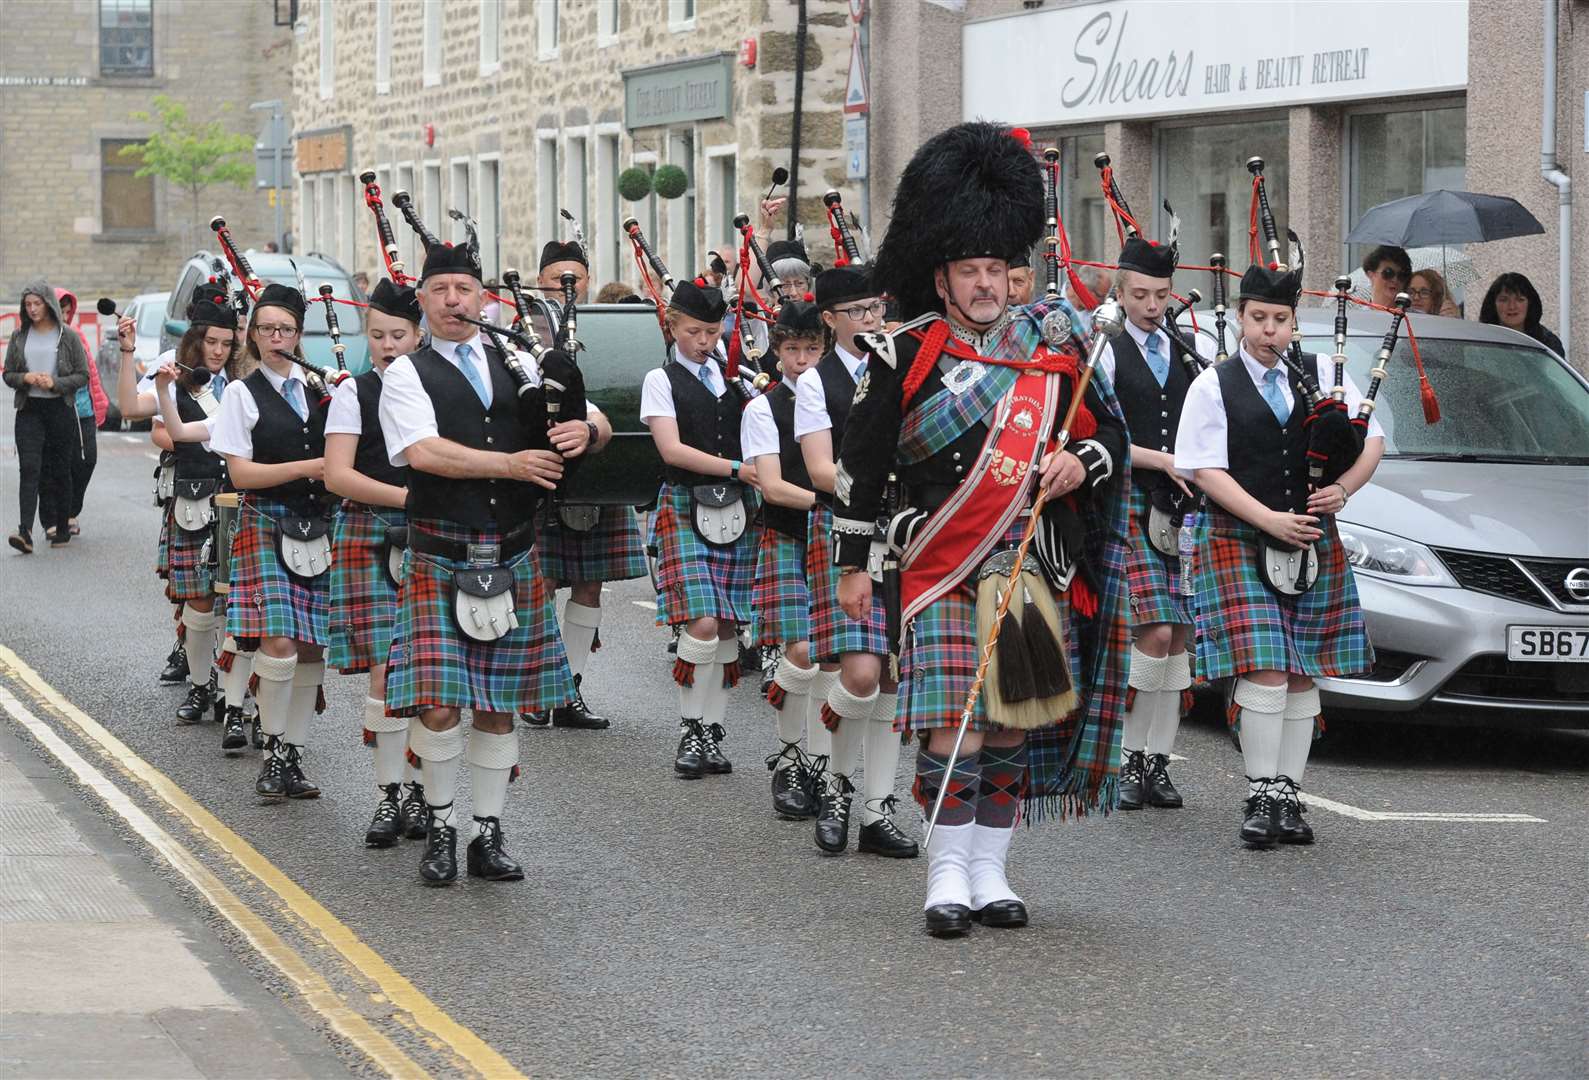 Strathisla Pipe Band march down Mid Street during the 2018 gathering.